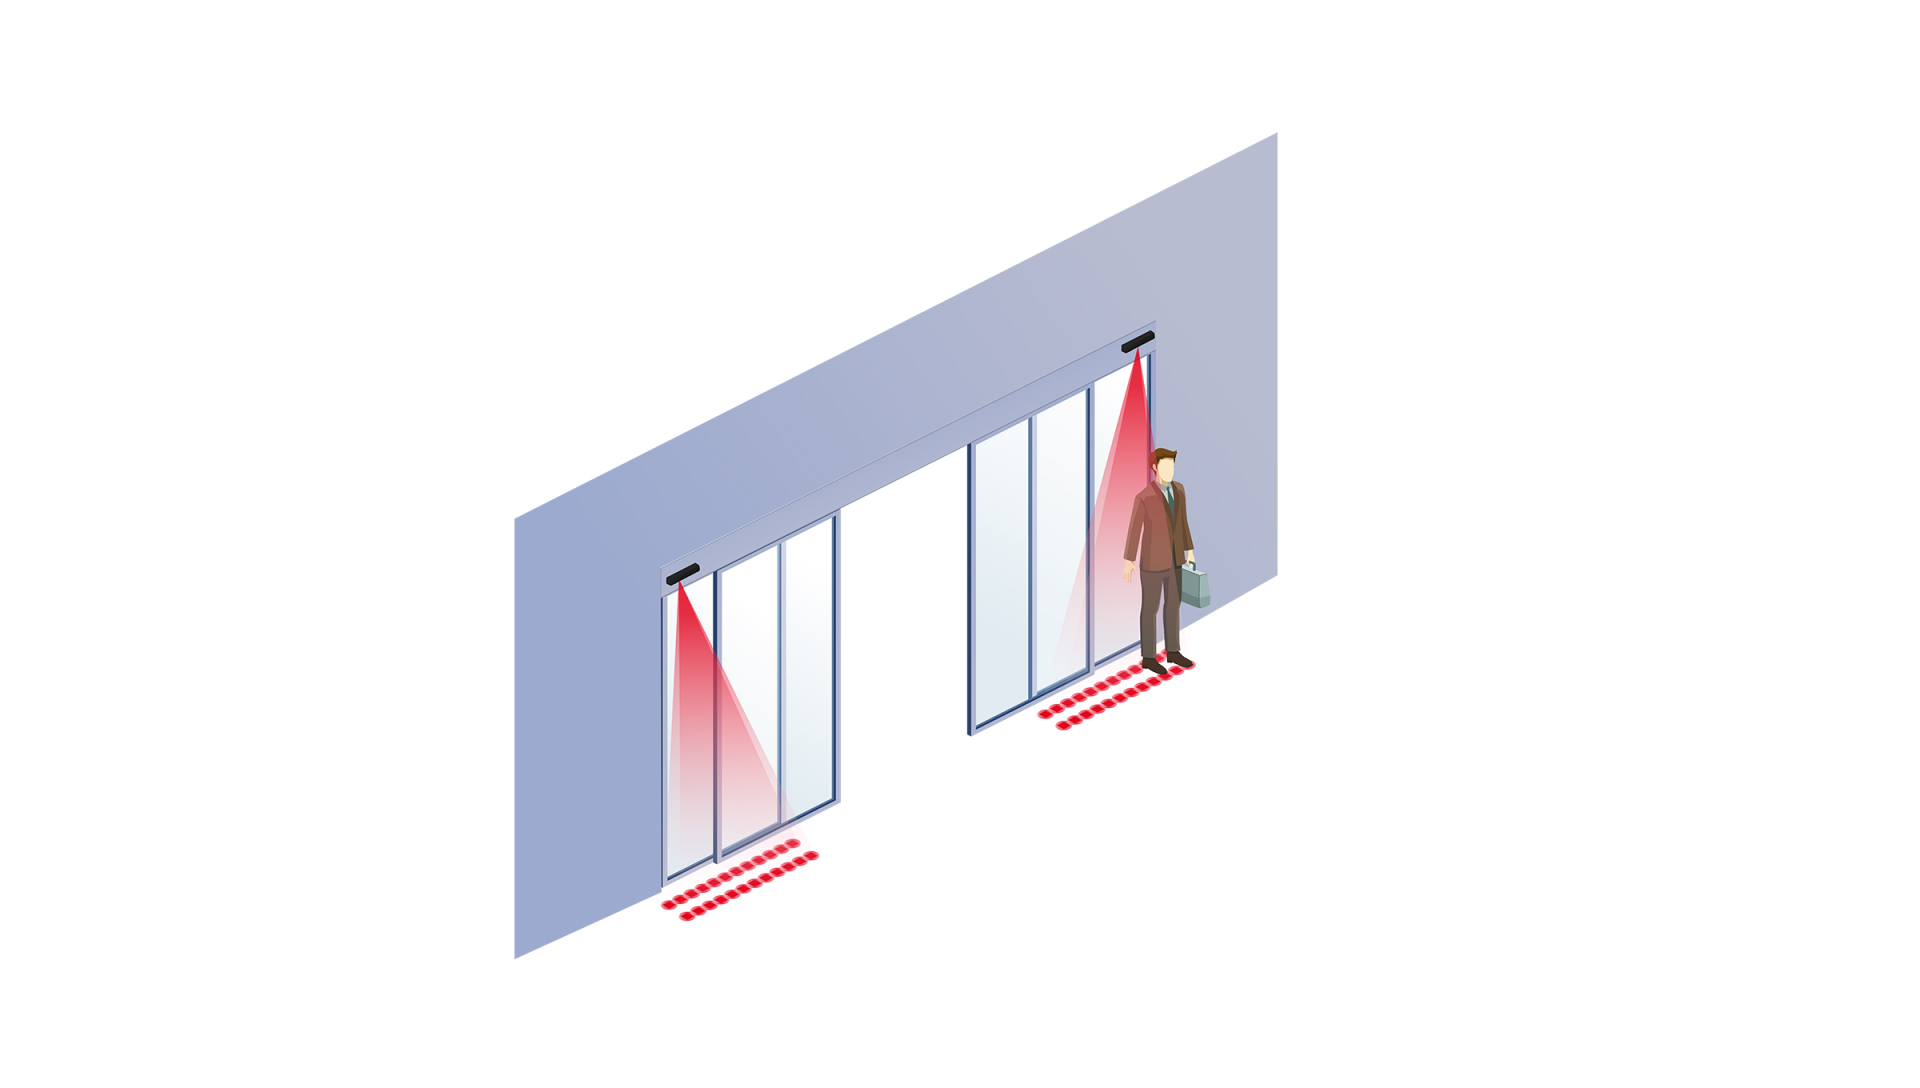 How do automatic door open sensors improve accessibility for people with disabilities?